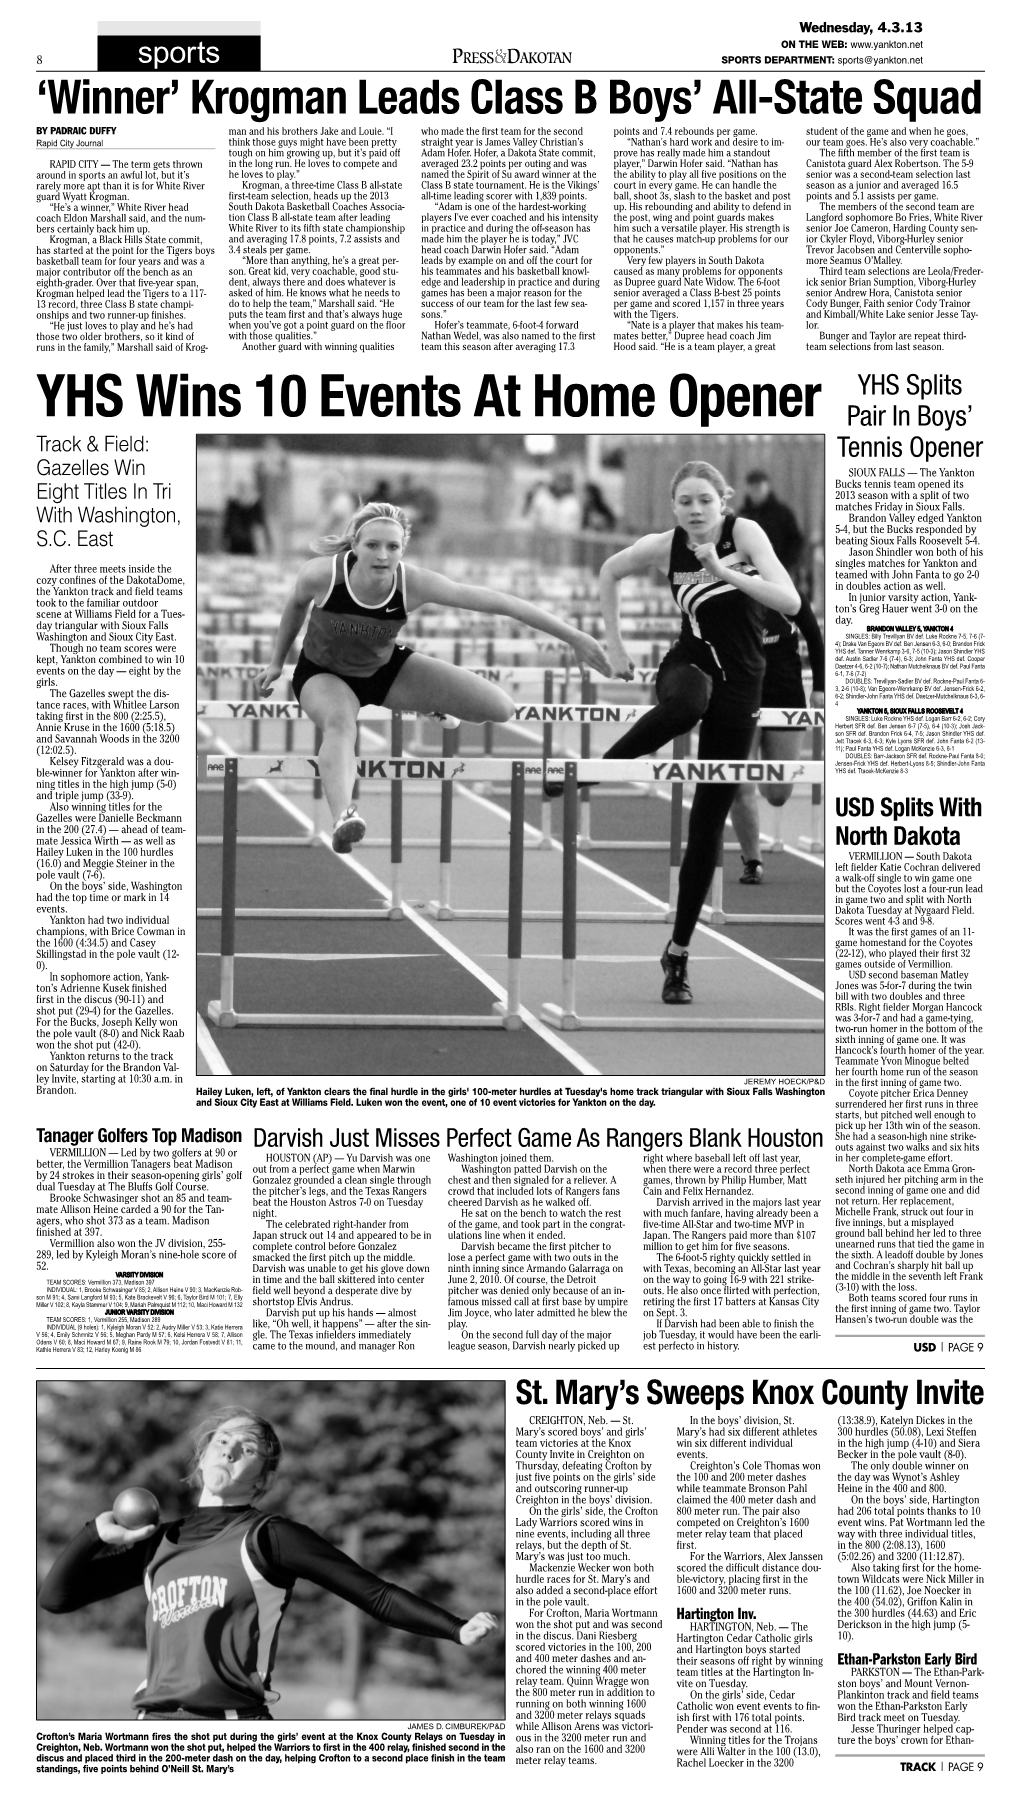 YHS Wins 10 Events at Home Opener